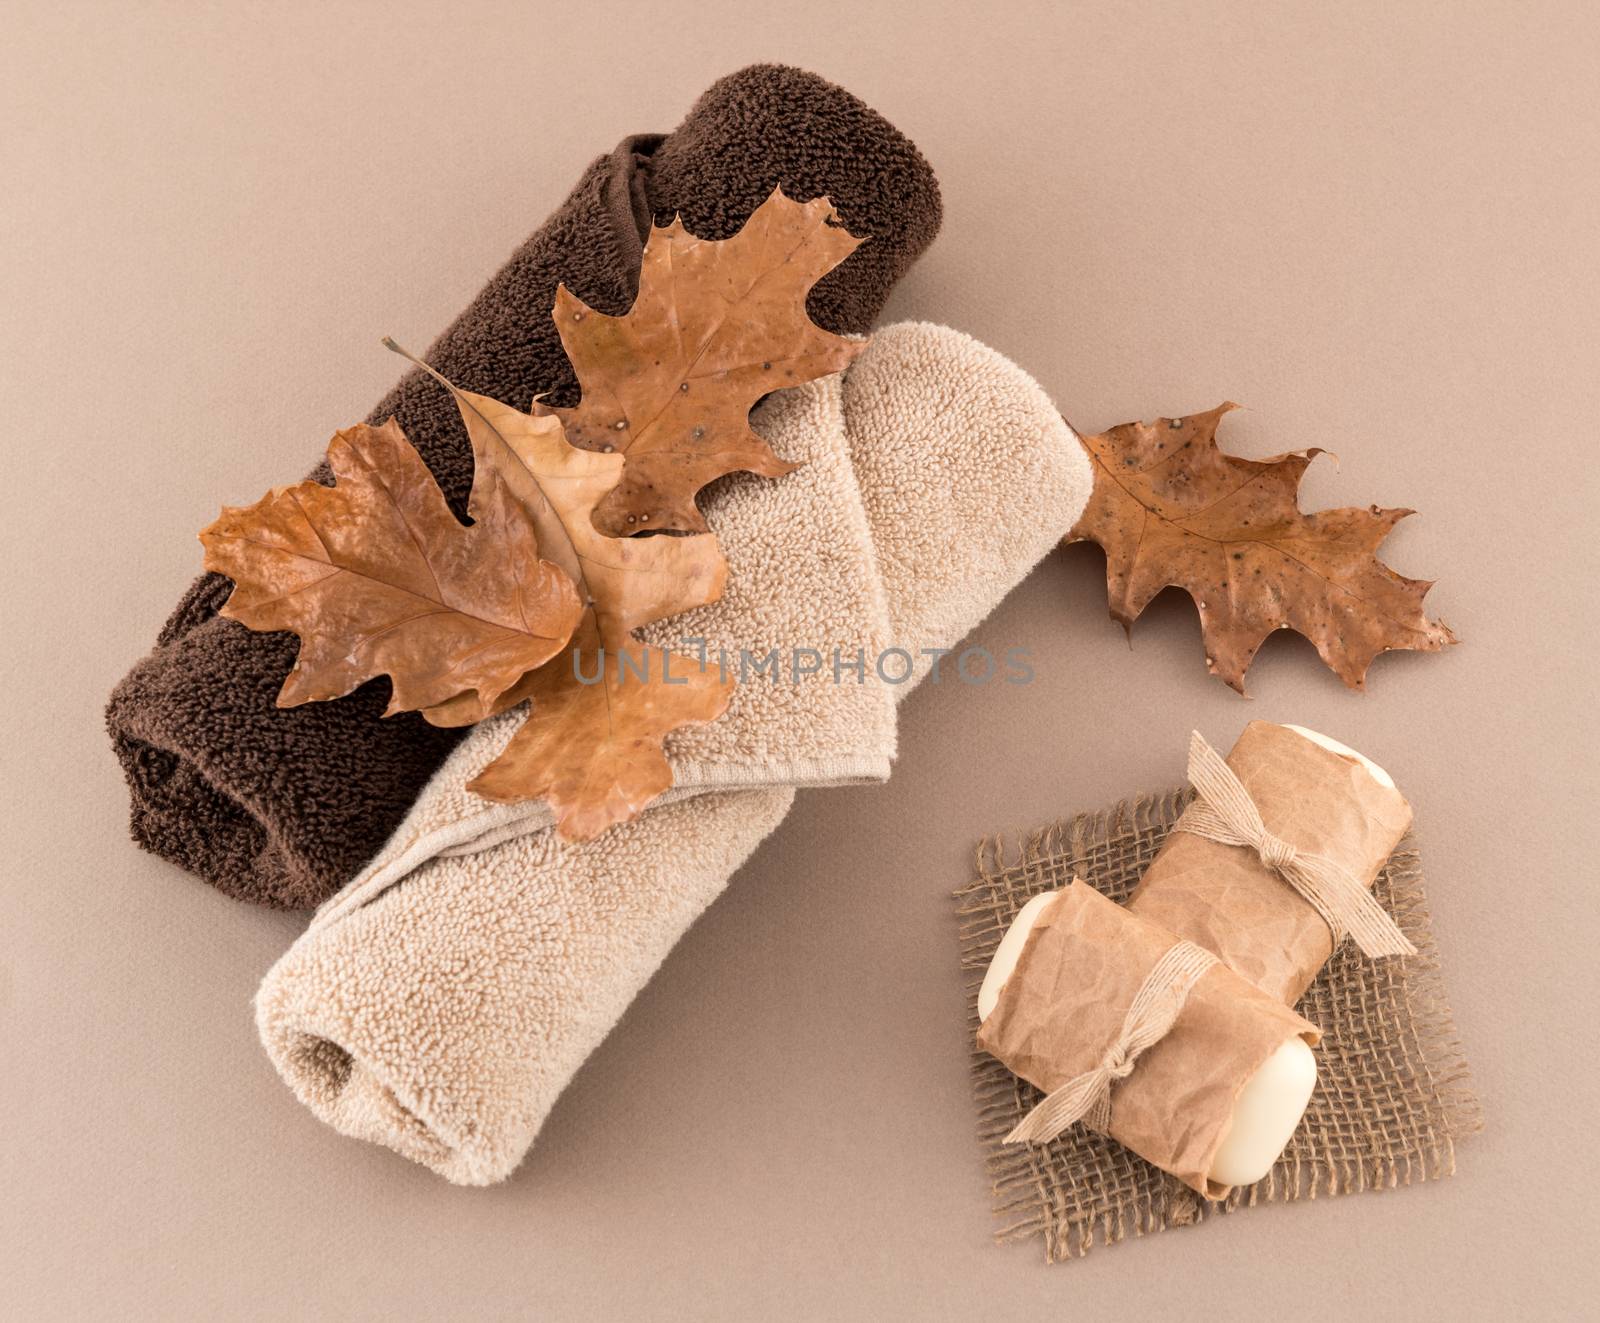 Autumn Spa with Artisan Soap and Luxury Towels by krisblackphotography